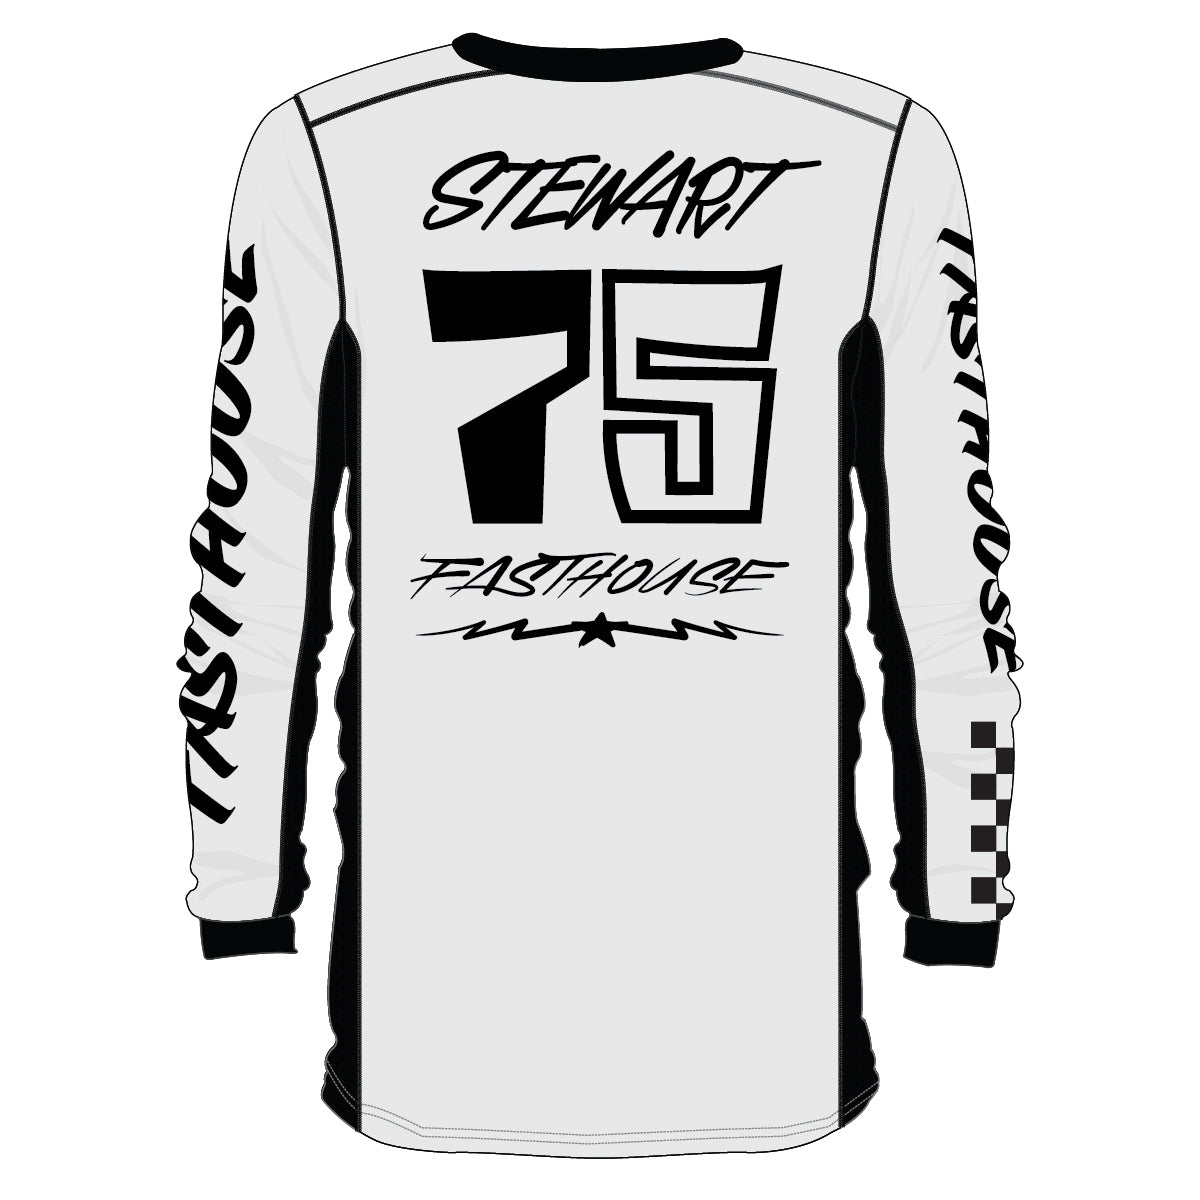 Jersey ID Kit - Two Face